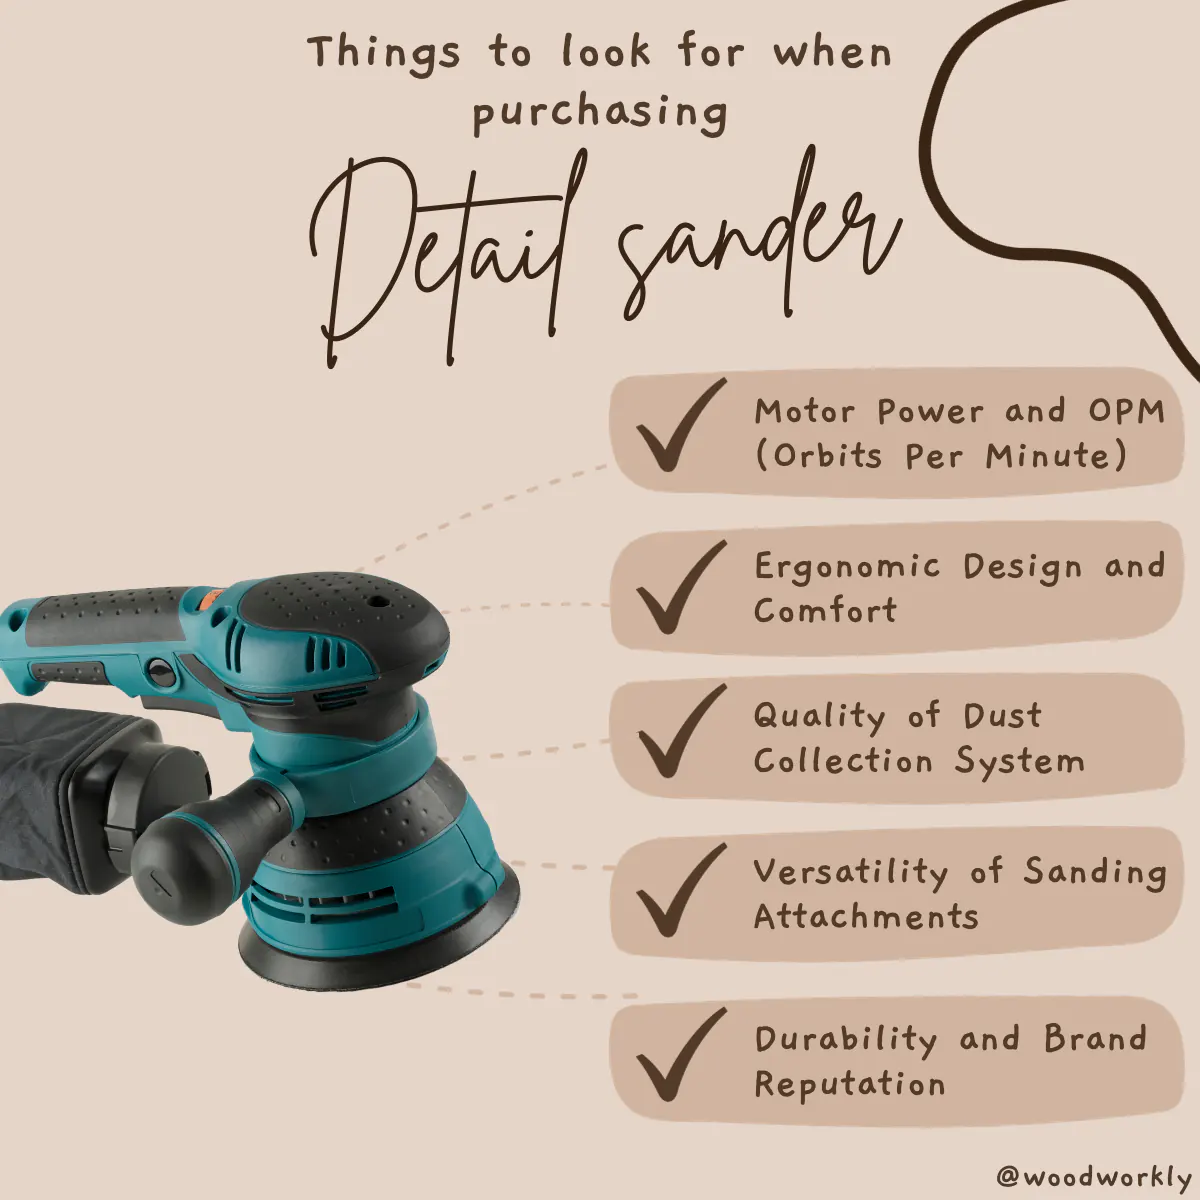 Things to look for when purchasing a detail sander for furniture